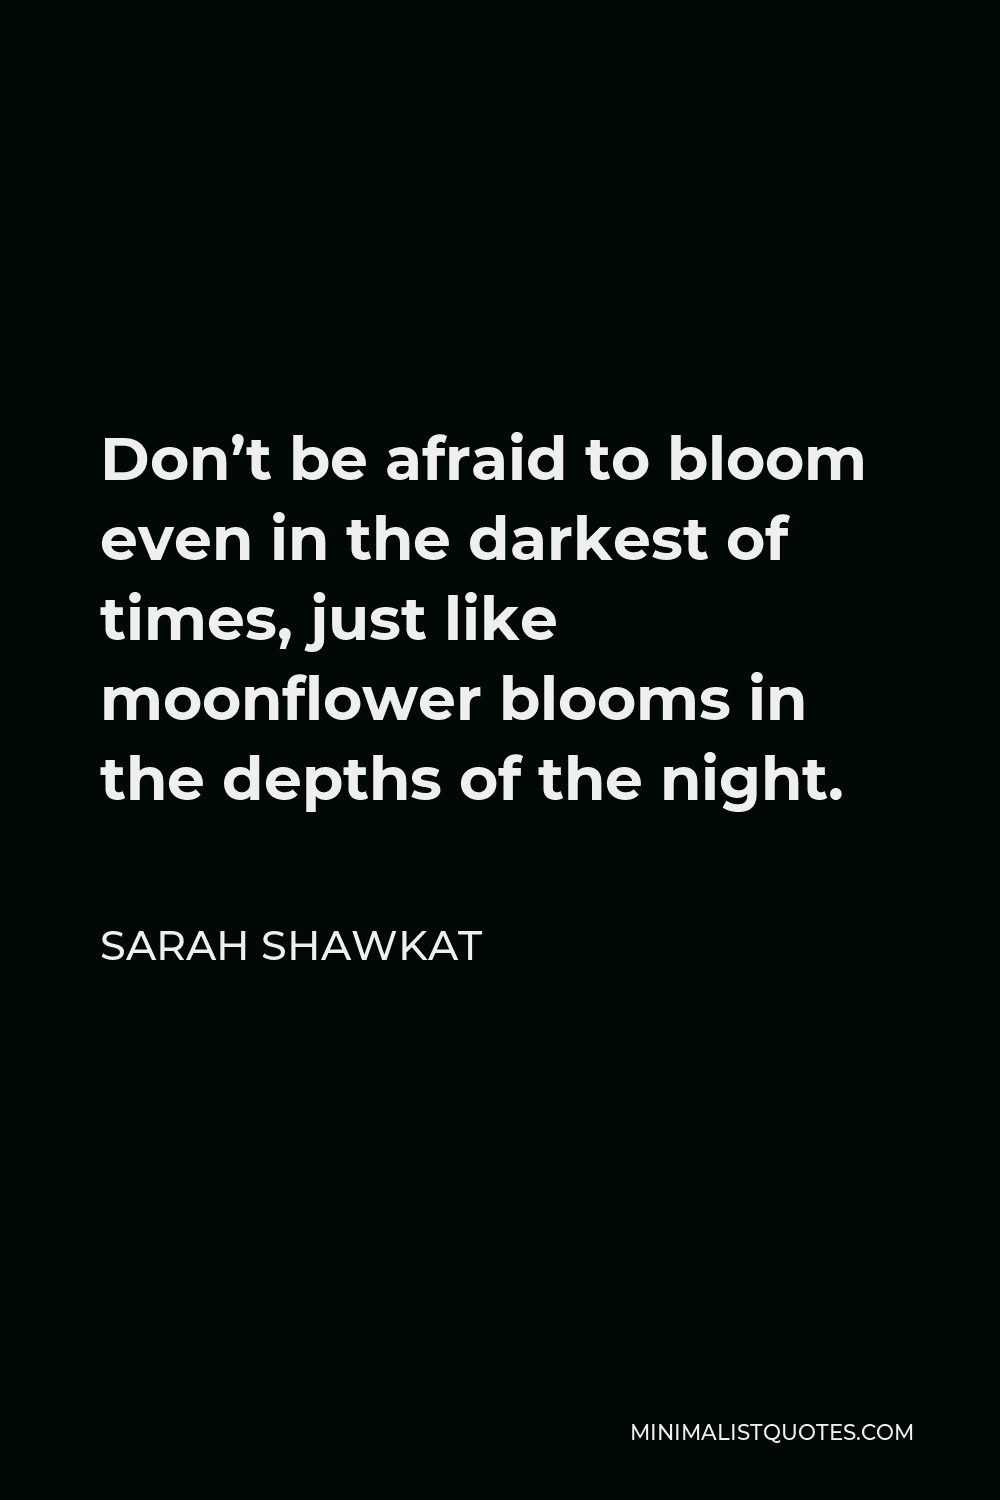 Sarah Shawkat Quote - Don’t be afraid to bloom even in the darkest of times, just like moonflower blooms in the depths of the night.